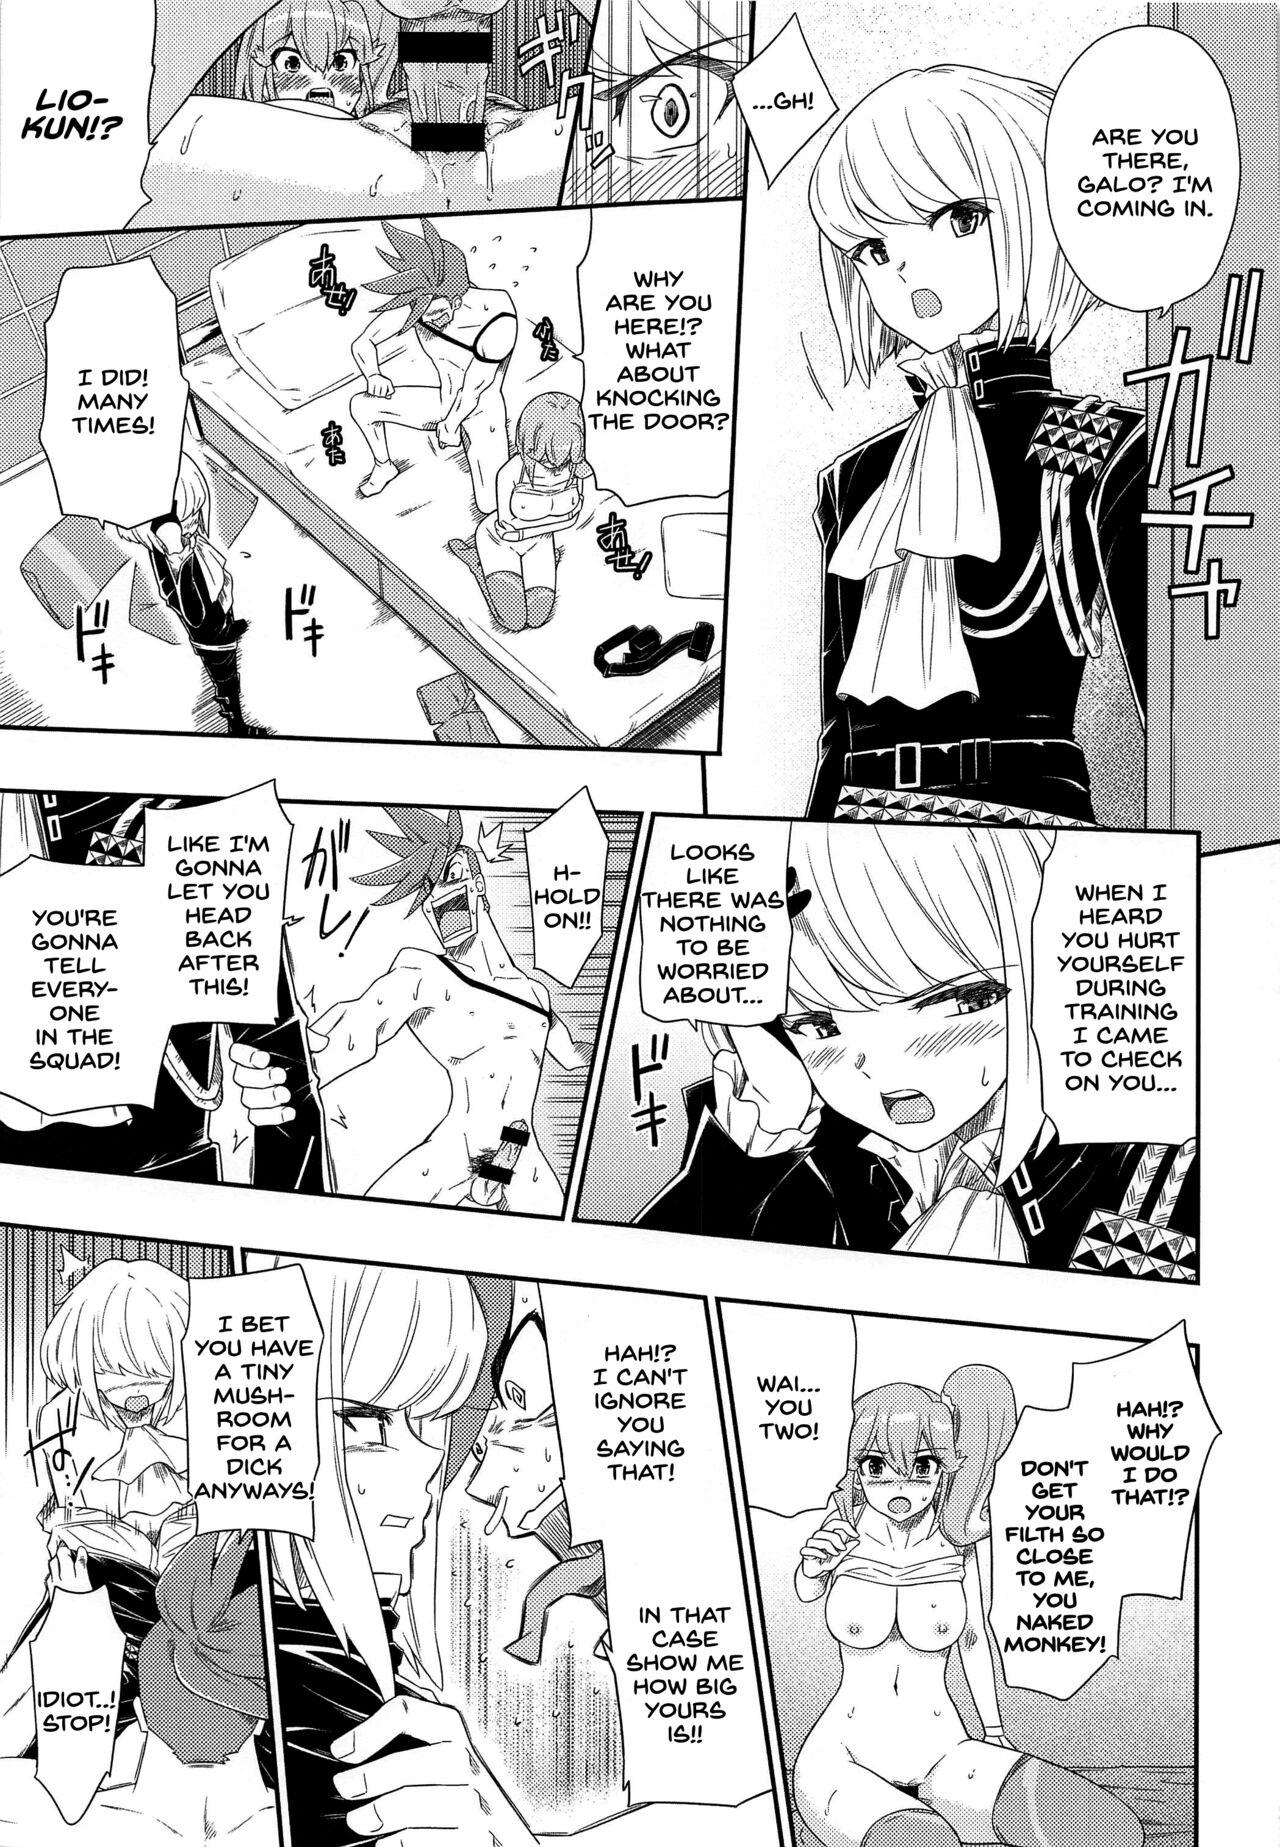 Doggystyle EROMARE - Suddenly 3P sex is happening... Virginity - Page 6